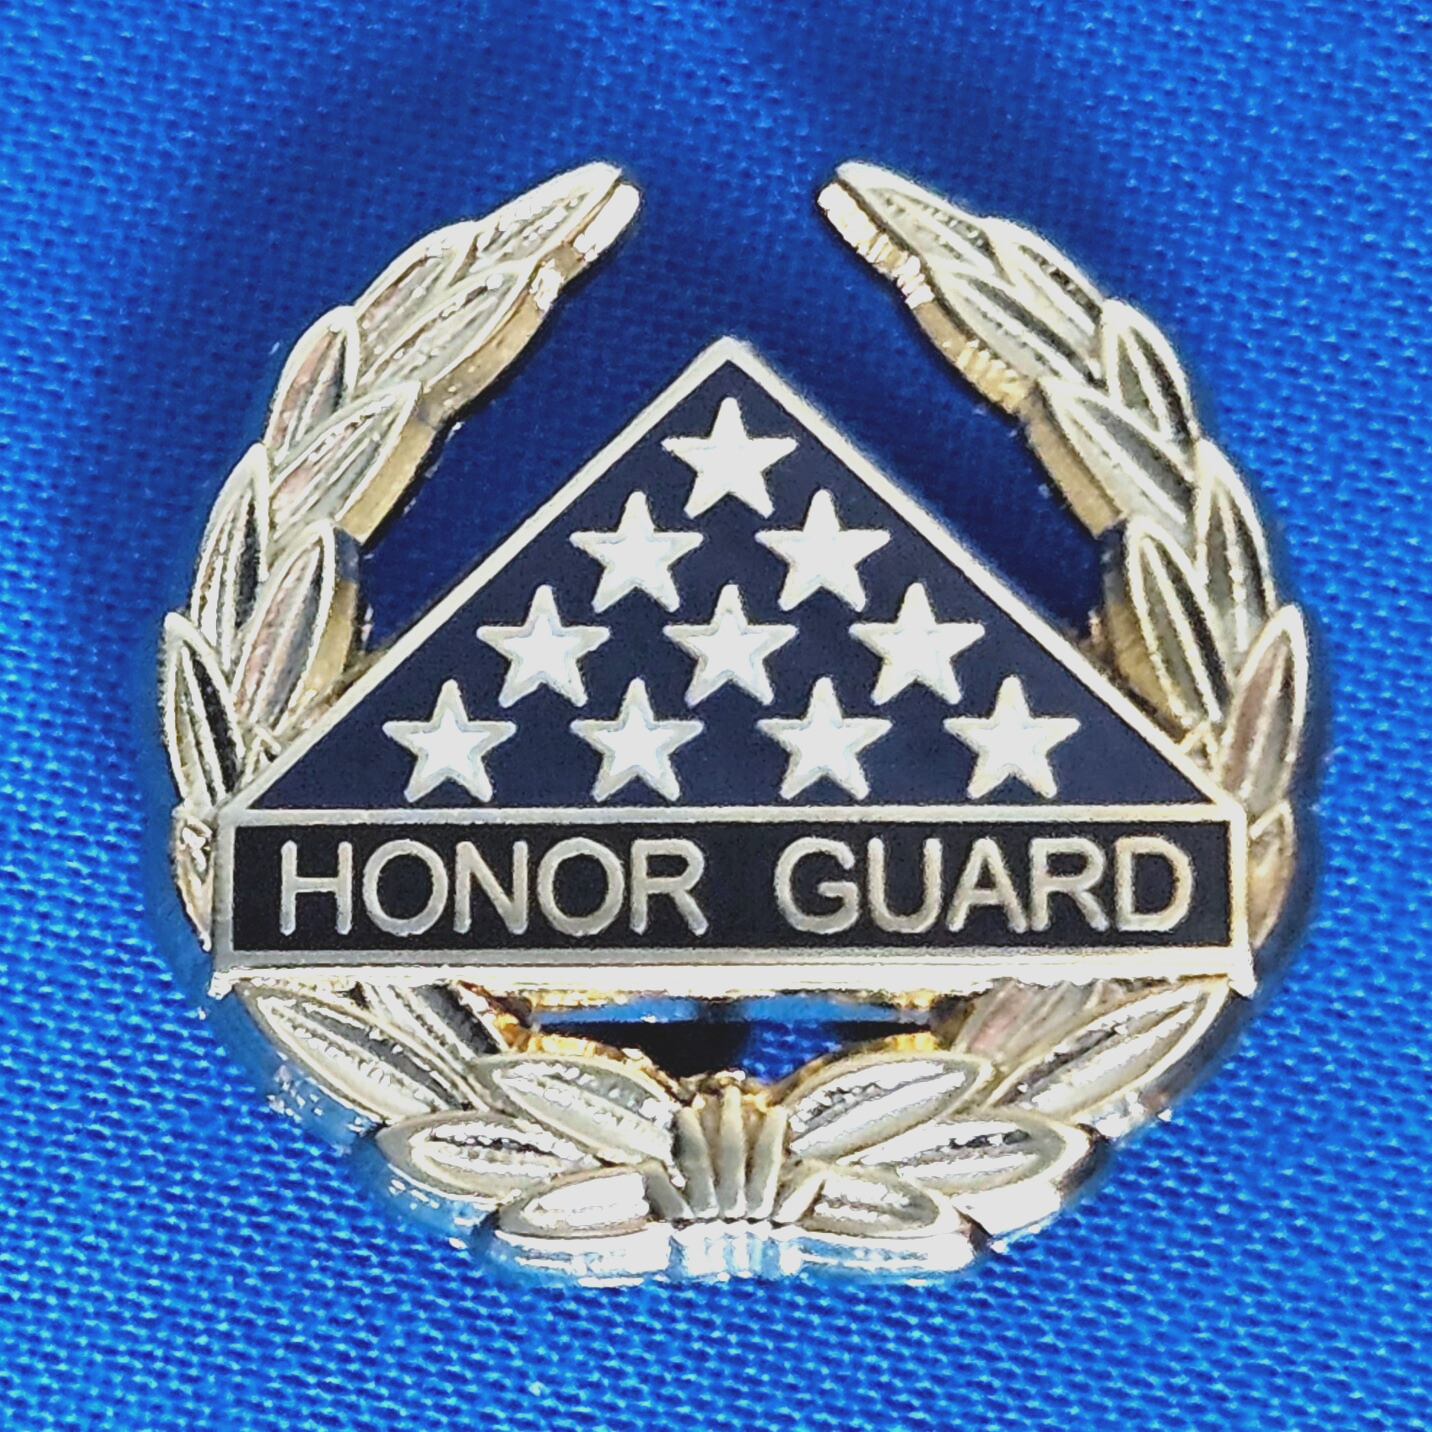 HONOR GUARD PIN, FLAG-LEAF, Item #121-10 K Gold Plated Finish